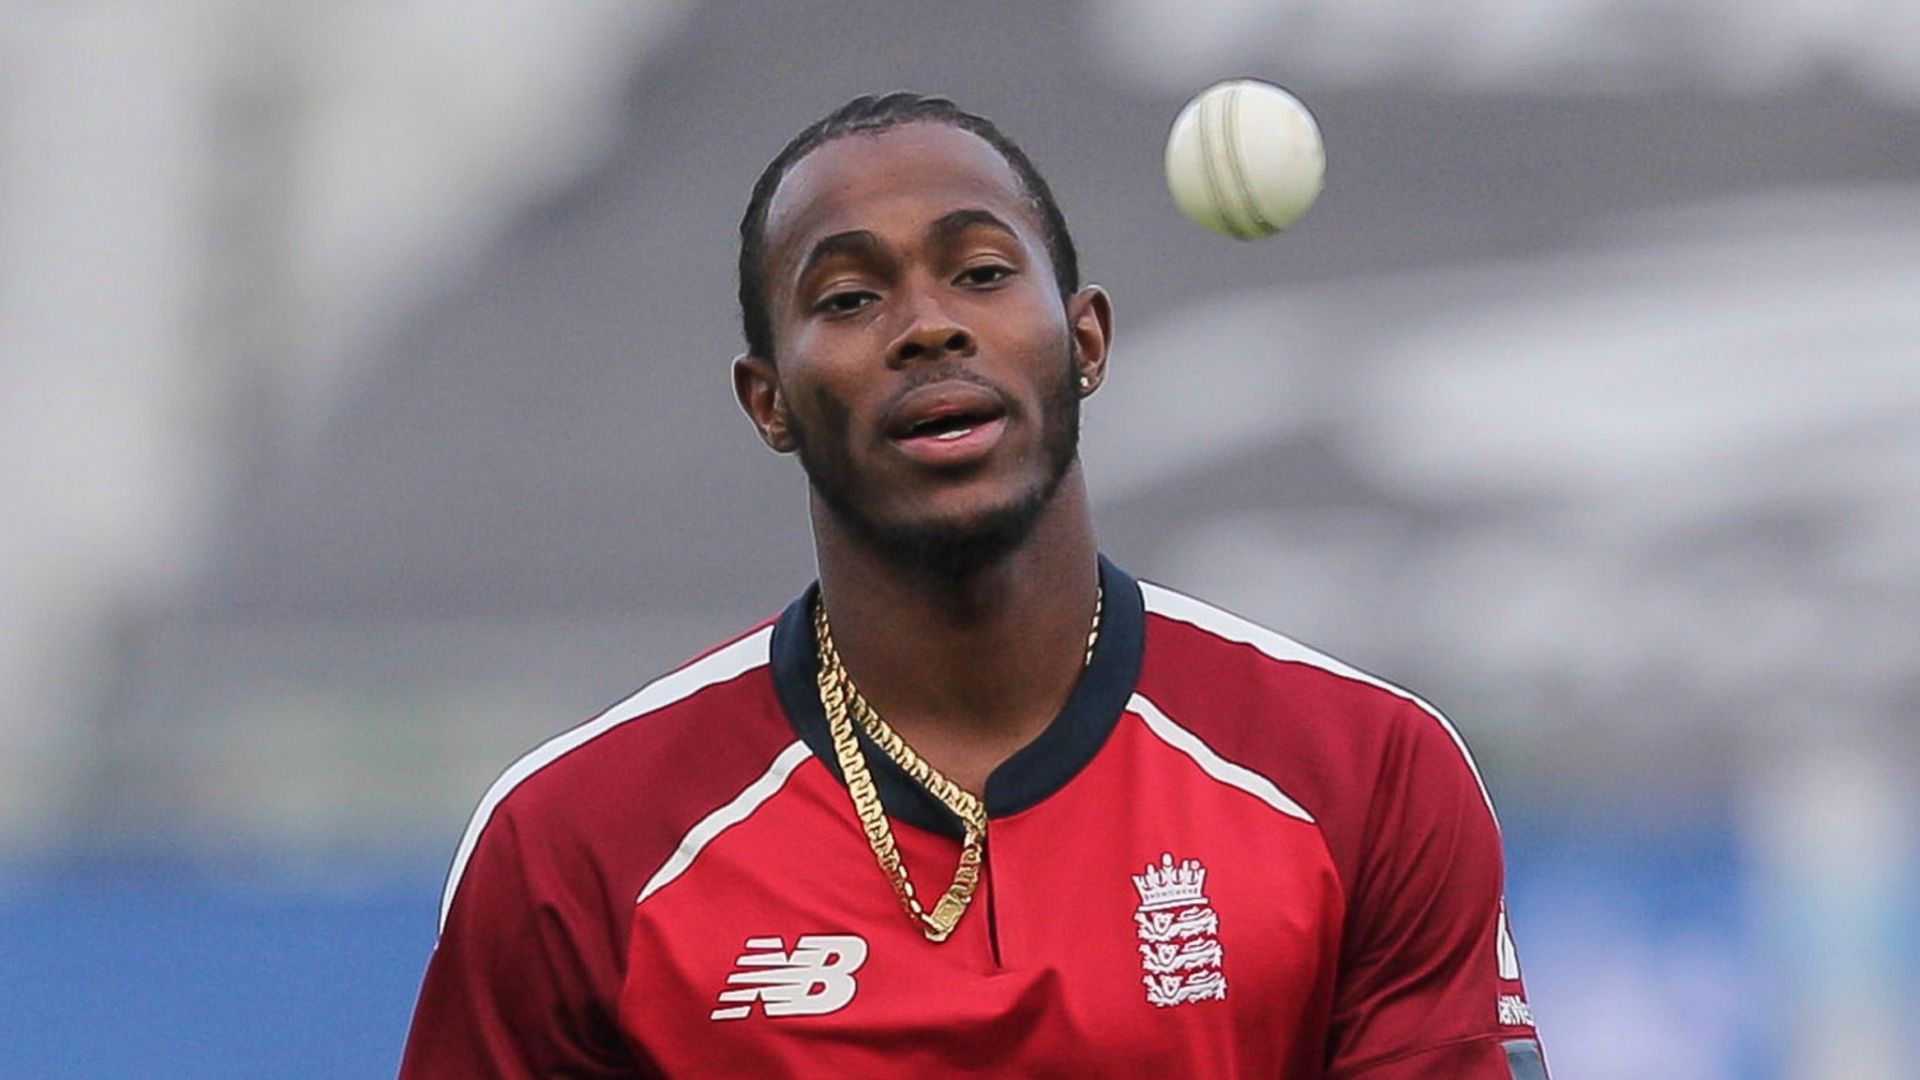 Mumbai Indians pulled a rabbit out of the hat by buying Jofra Archer during the IPL 2022 auction.